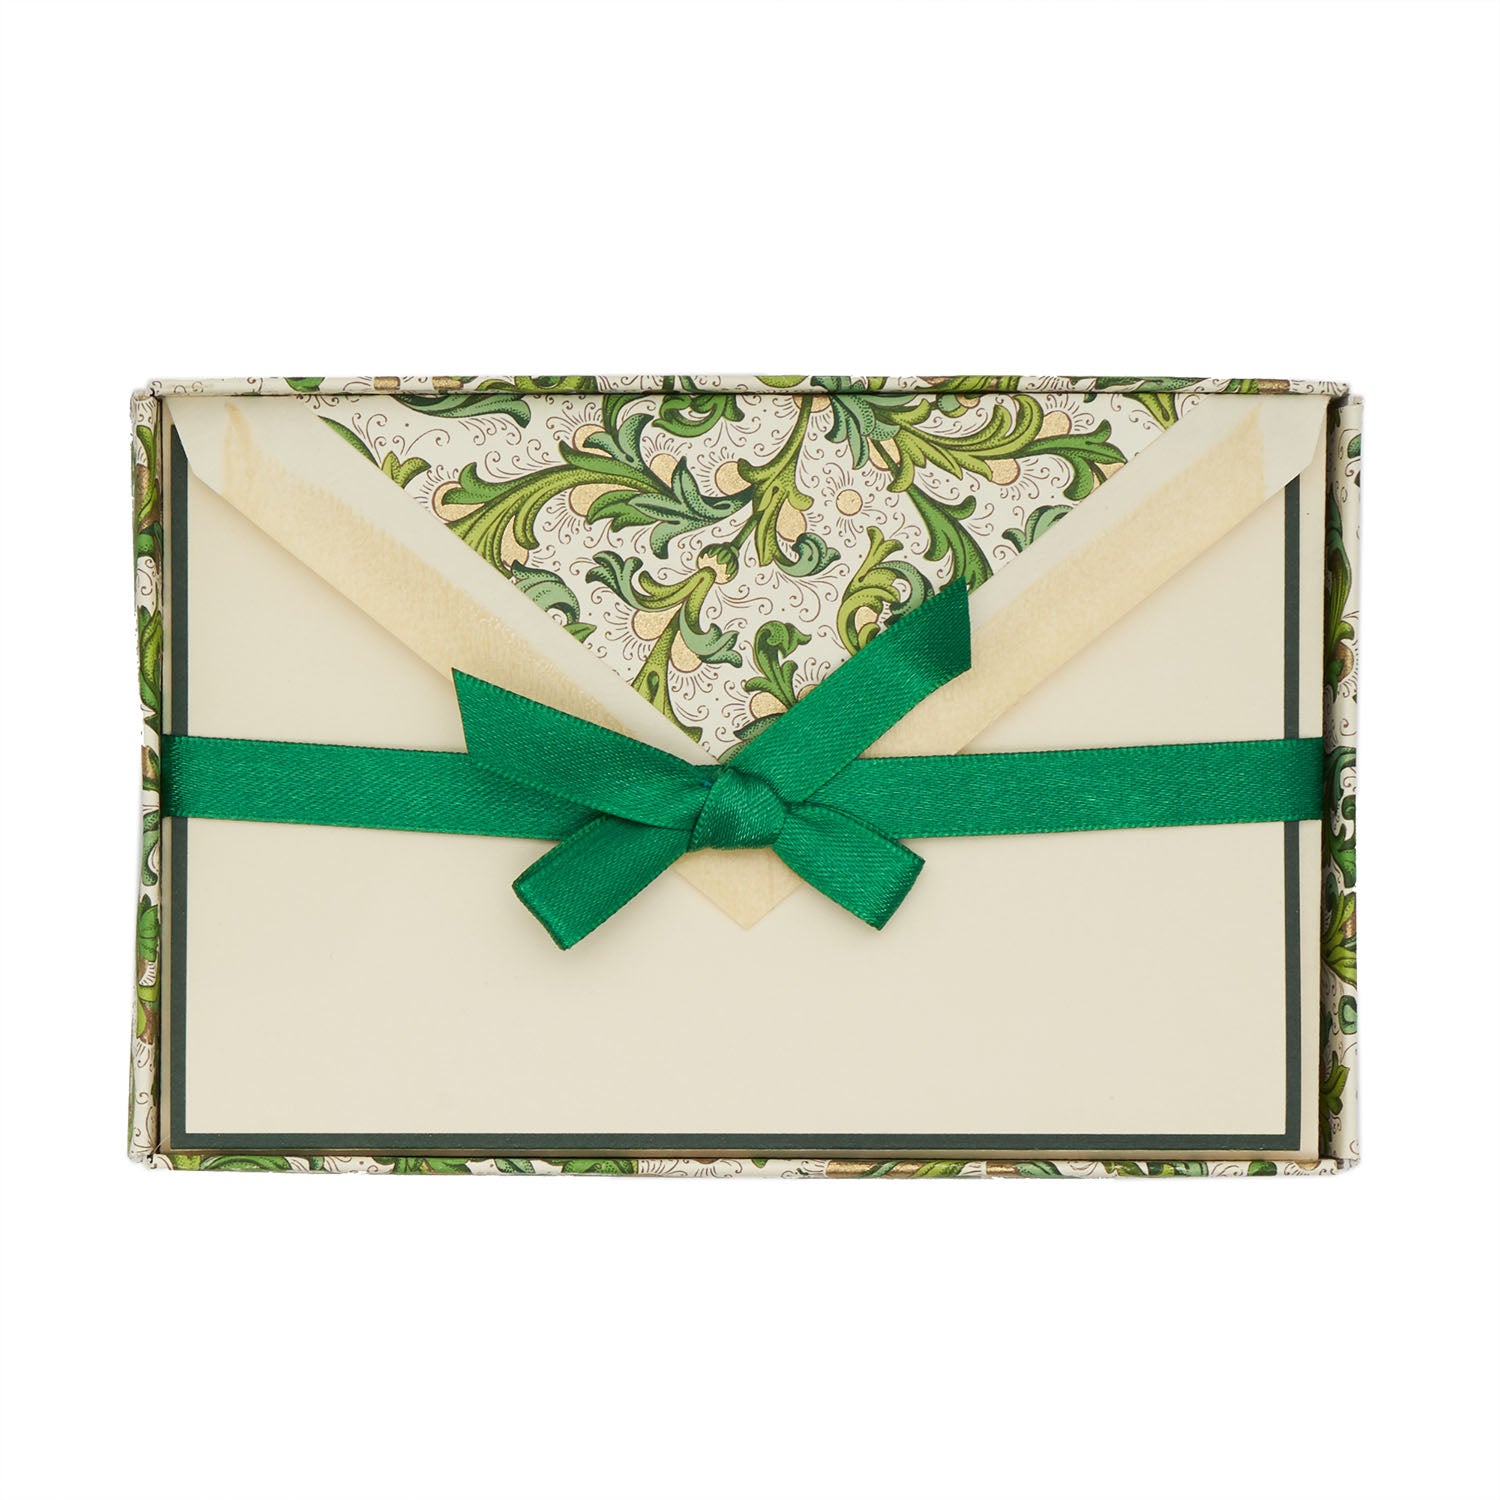 Classica Italiana 100% Cotton Letter Set Florentine Green Fountain Pen Friendly Made in Italy Box with bow